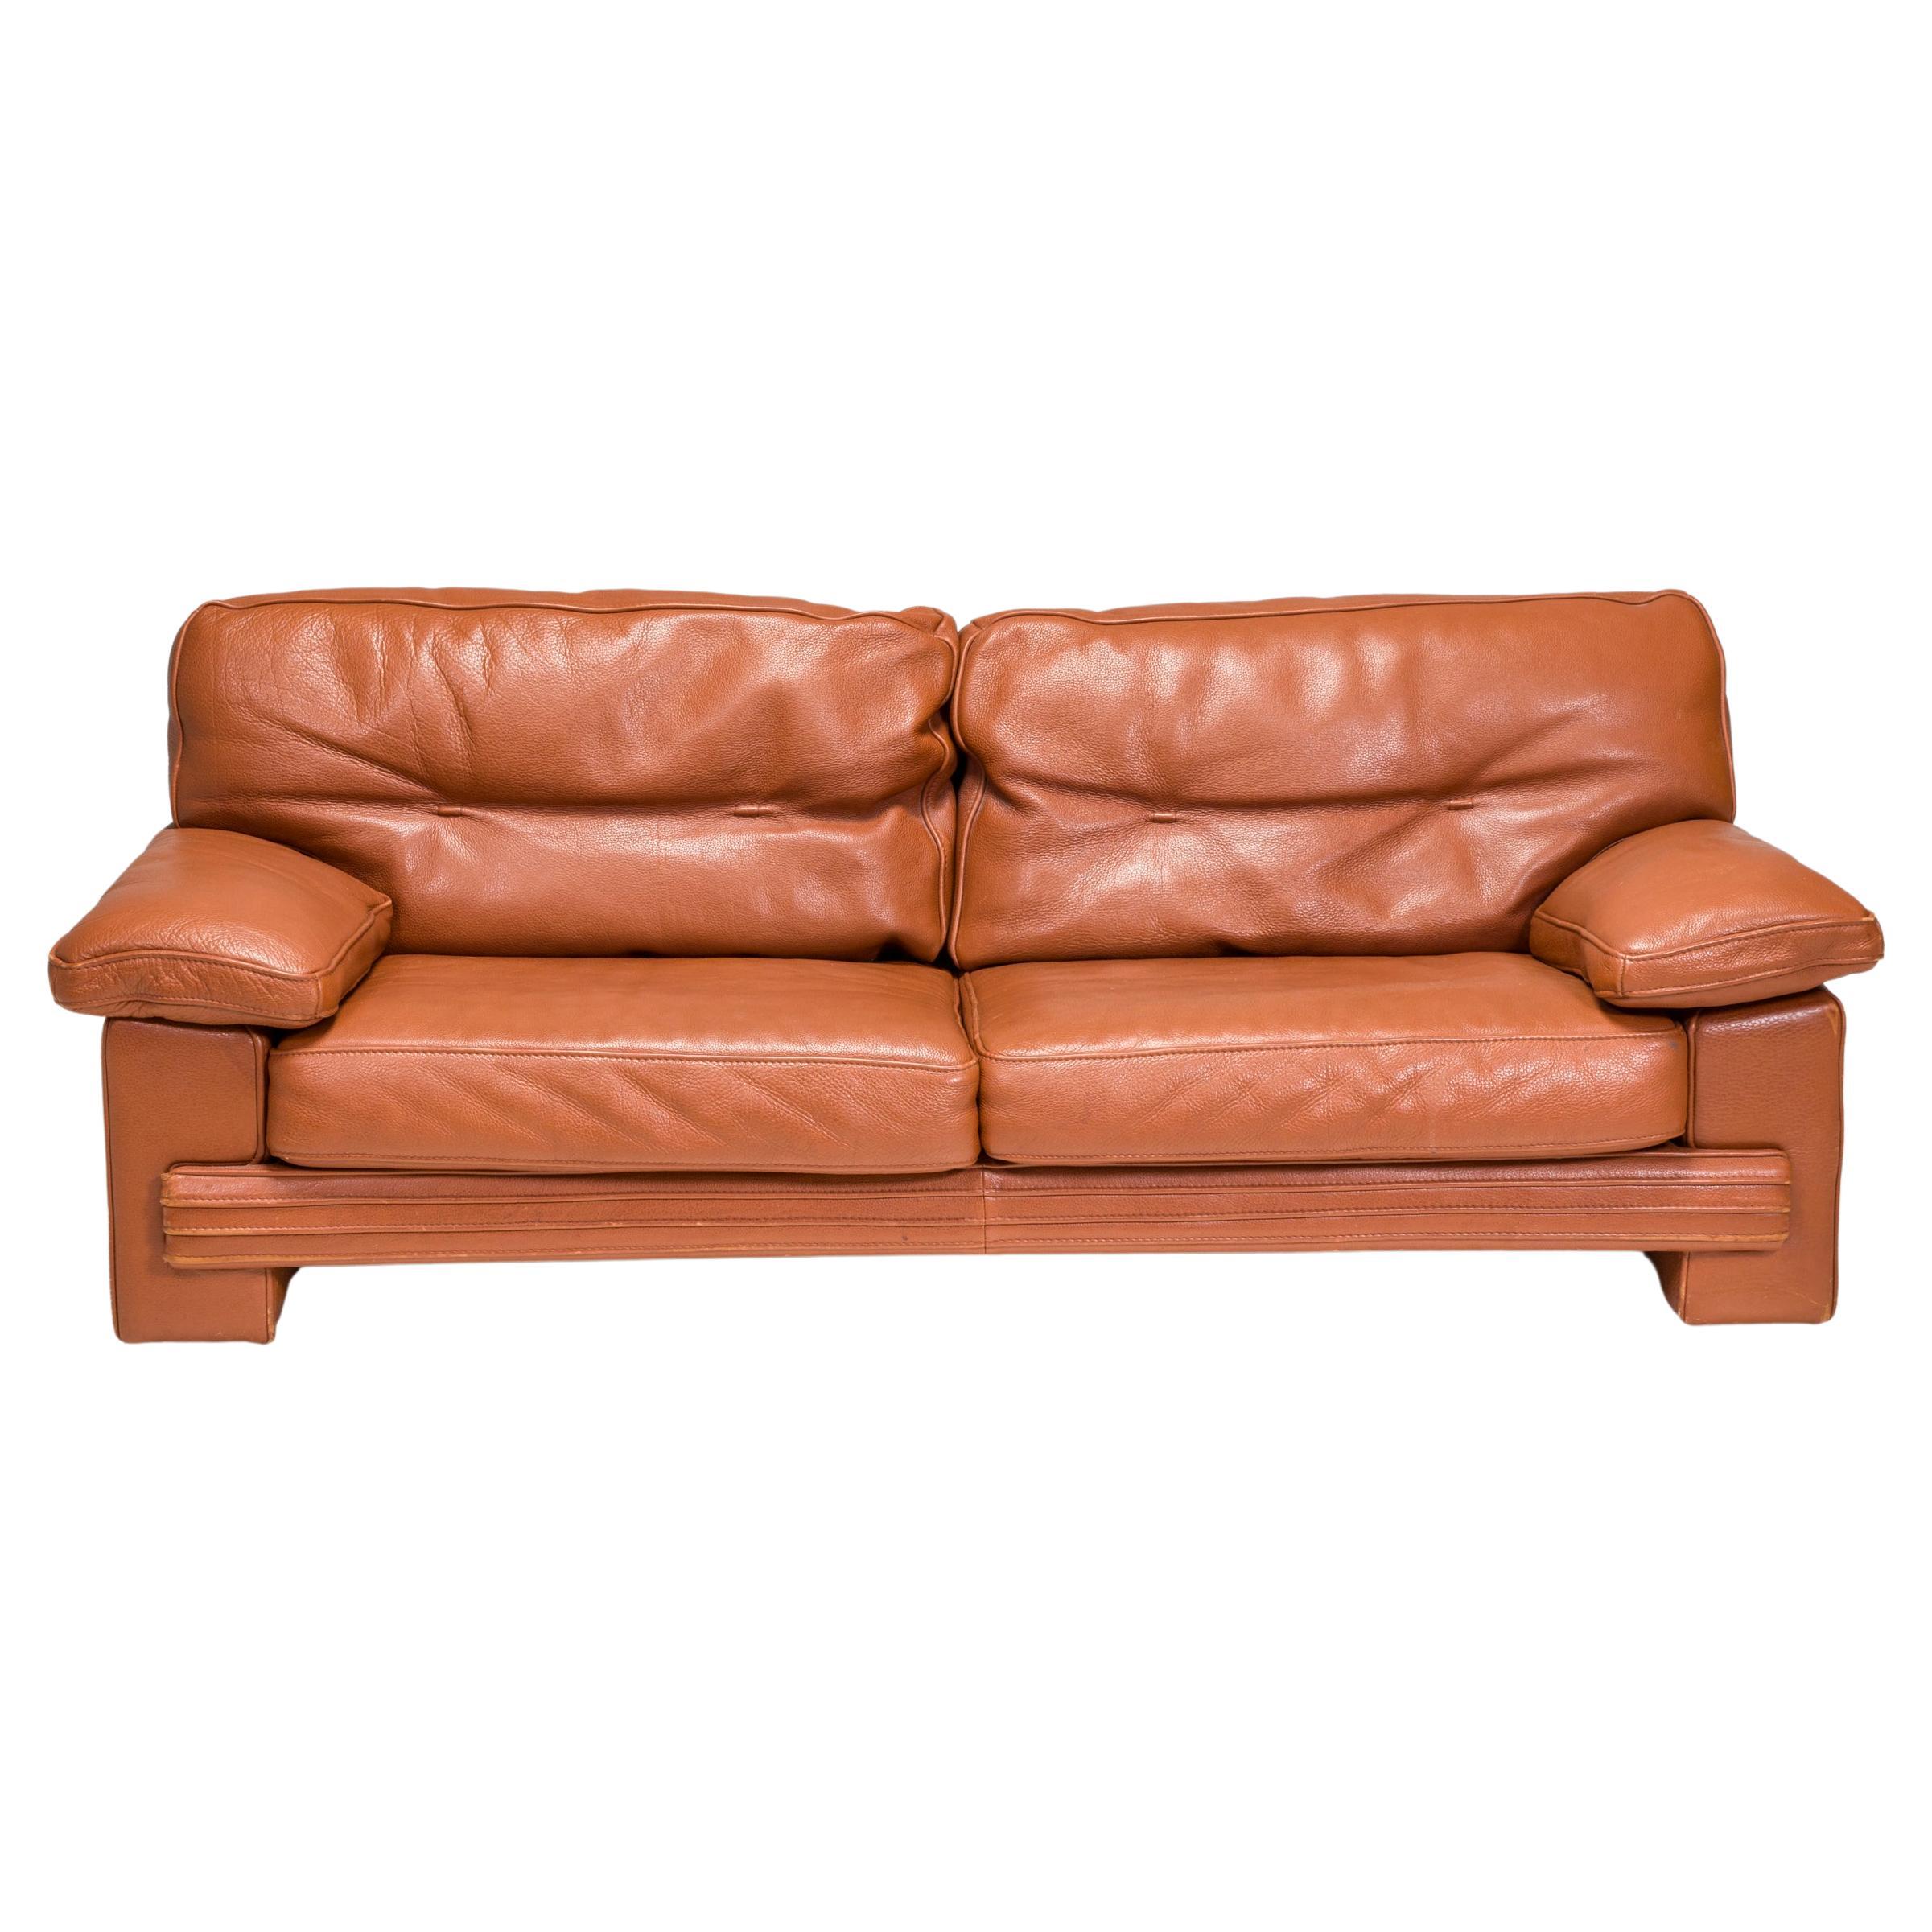 Roche Bobois Brown Leather Sofa, Three Seater For Sale